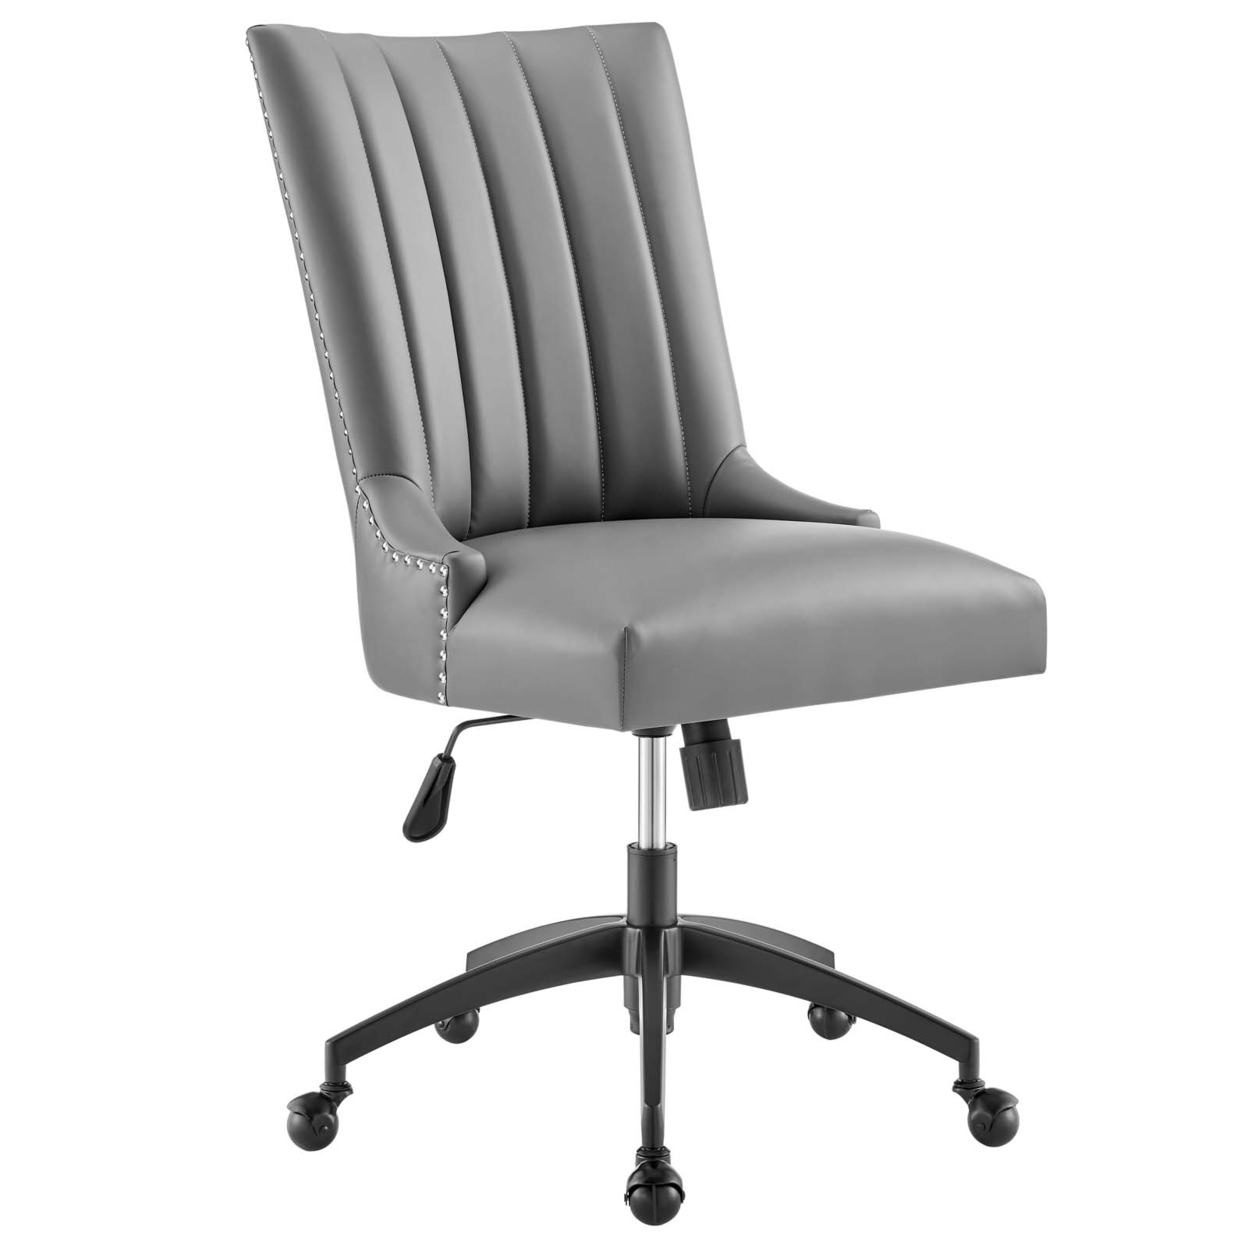 Empower Channel Tufted Vegan Leather Office Chair, Black Gray